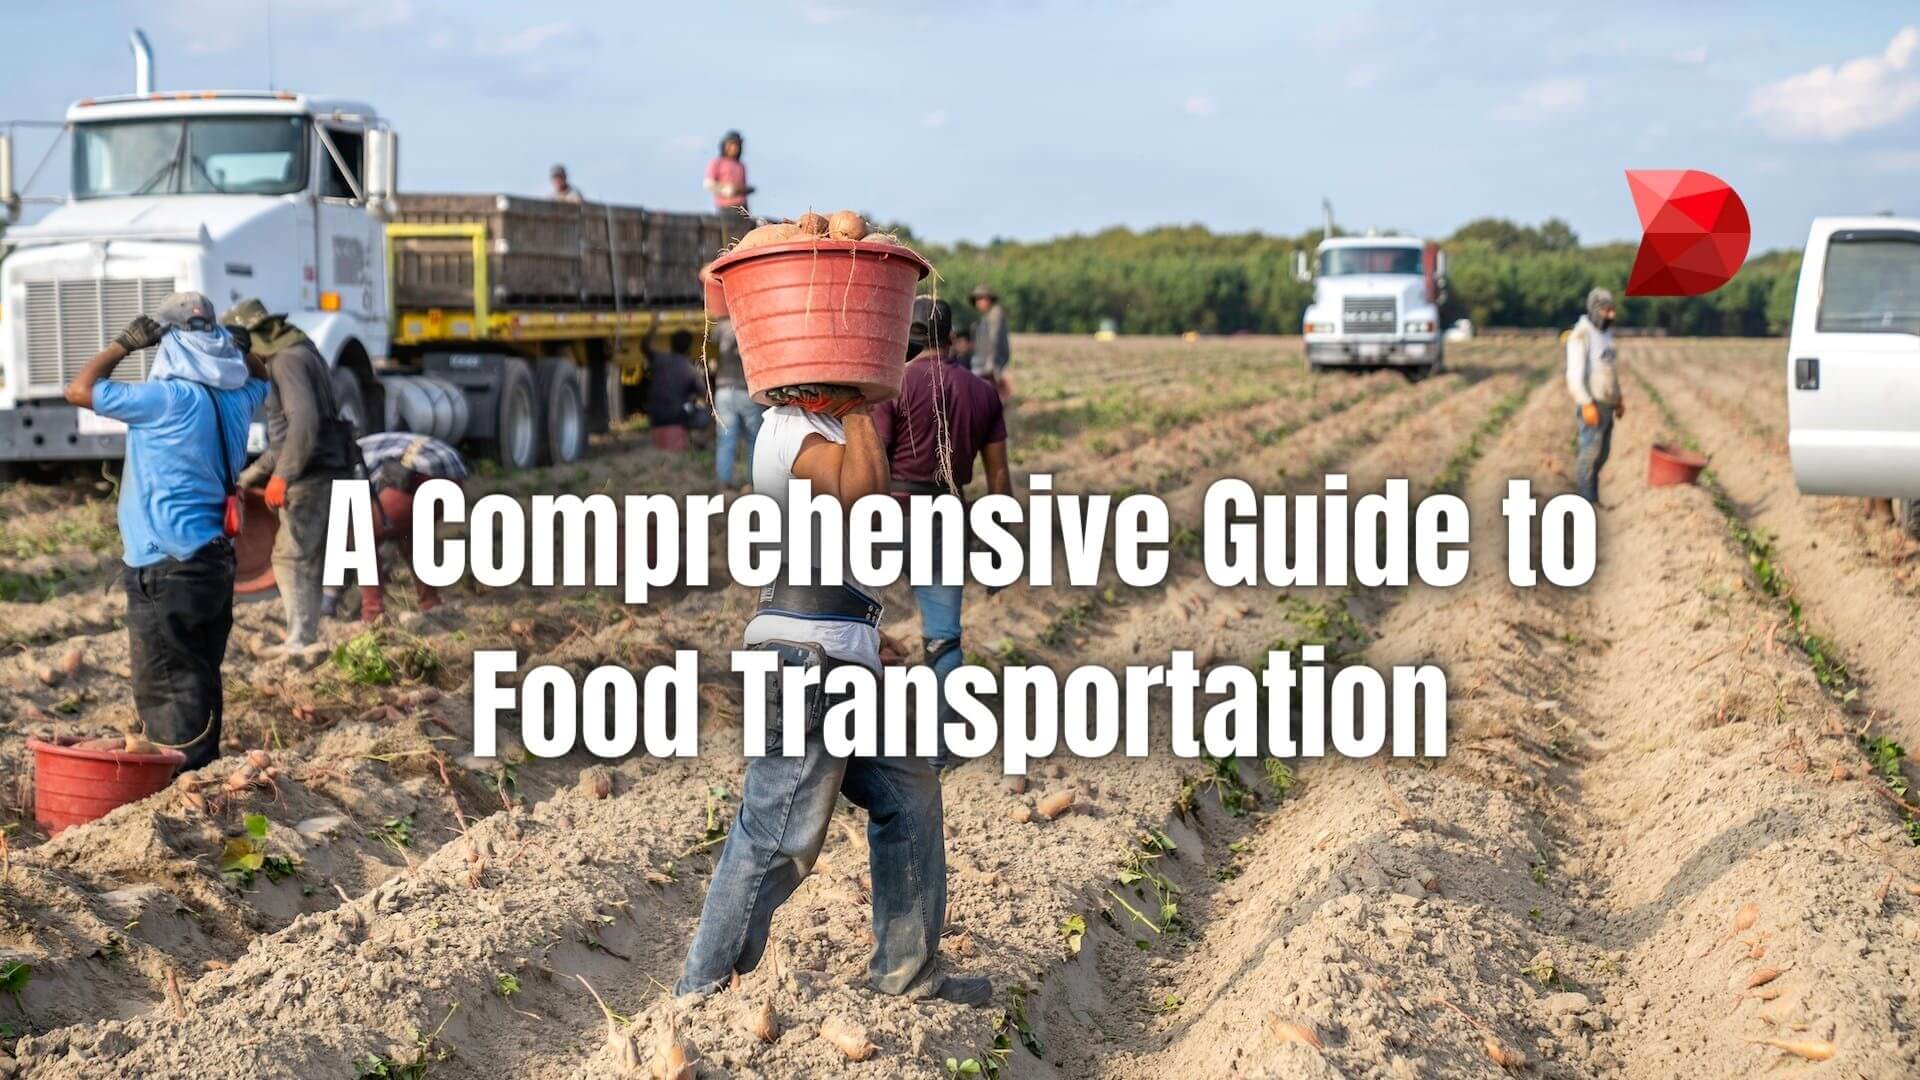 We will discuss the significance of food transportation and tips for a safer quality food transportation experience. Read here to learn more.